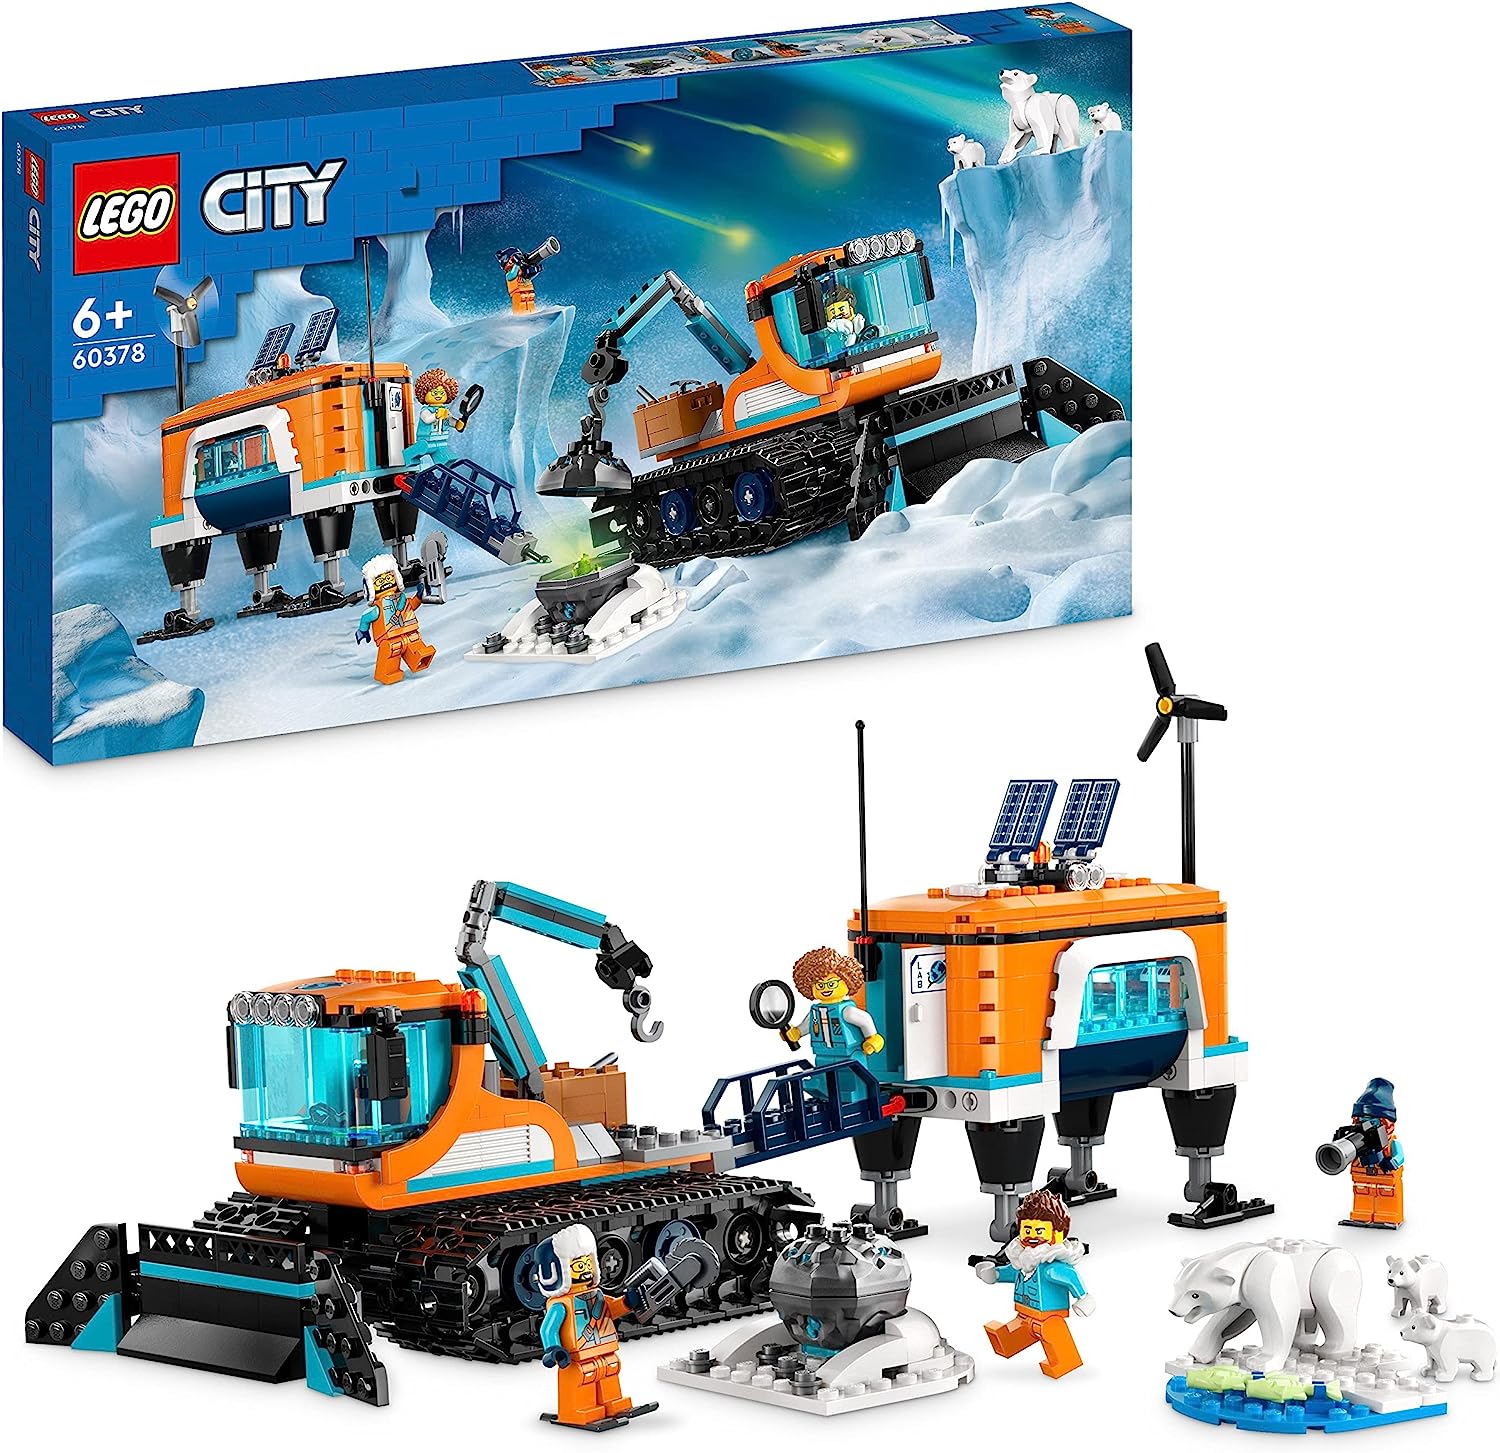 LEGO 60378 City Arctic Snow Plough with Mobile Laboratory, Snow Vehicle Toy for Building, Includes A Toy Crane, Meteorite, 4 Mini Figures and 3 Polar Bear Figures, Children from 6 Years